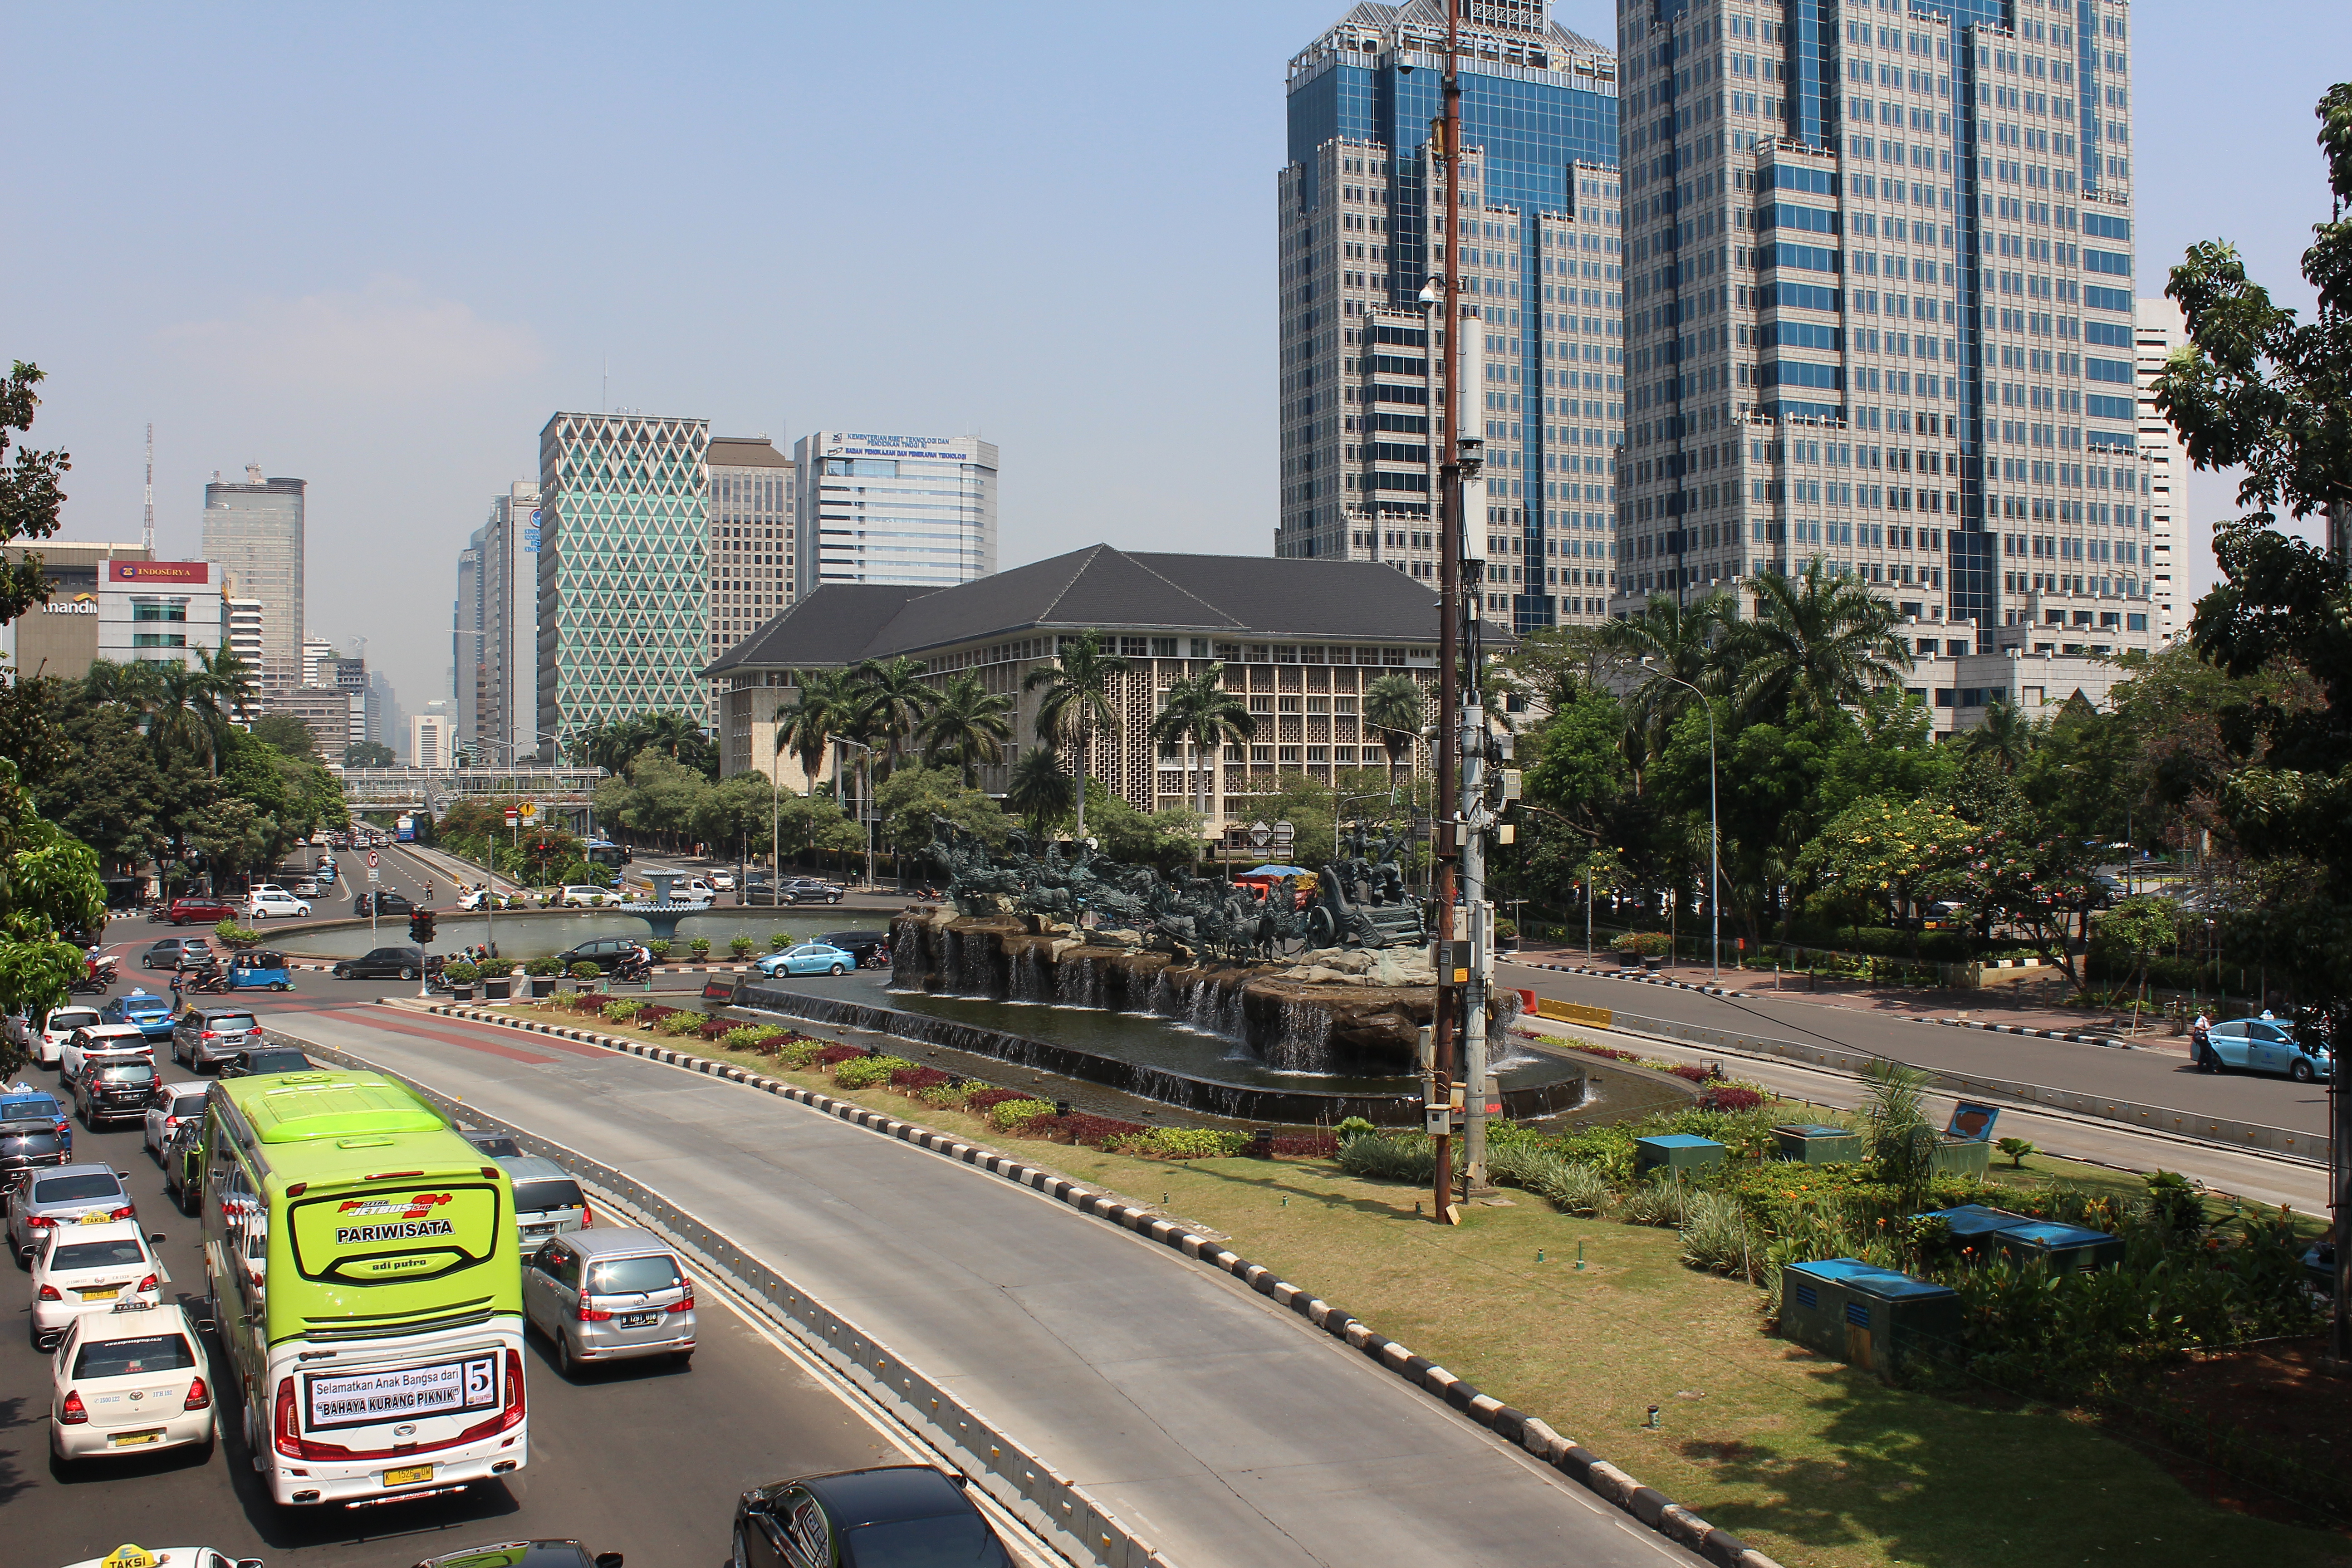 A lawned median dividing a road with cars and a green bus on one side, and tall buildings on the other, with palm trees